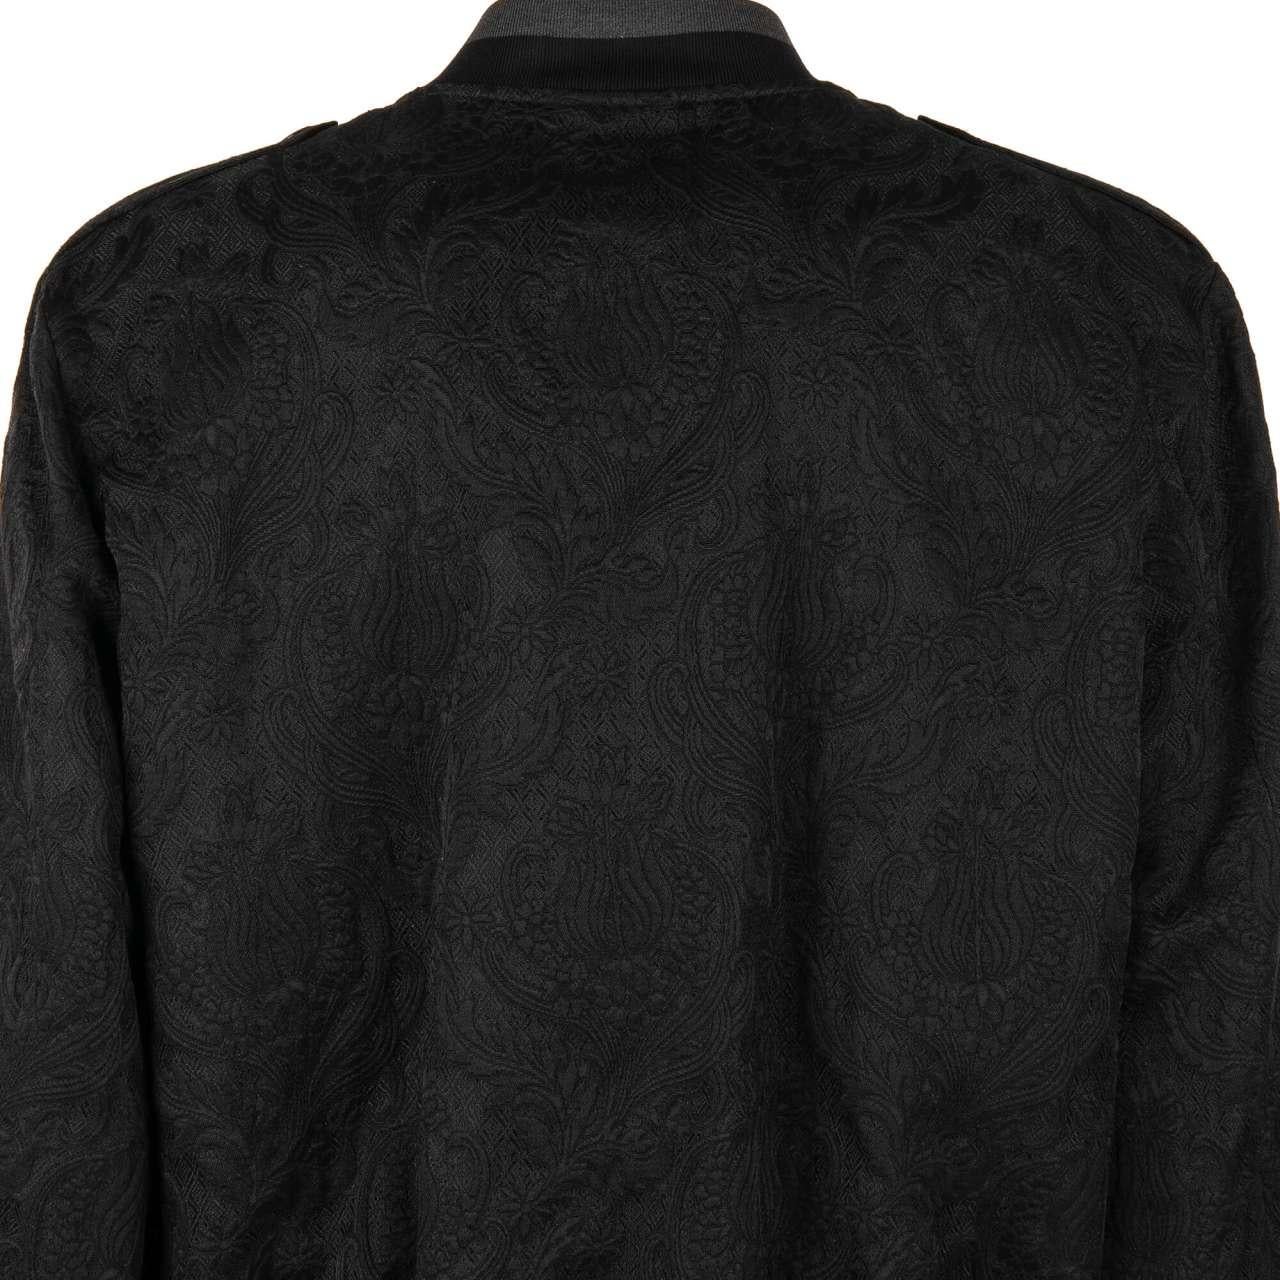 Dolce & Gabbana Brocade Bomber Jacket with Zip Closure and Pockets Black 56 For Sale 2